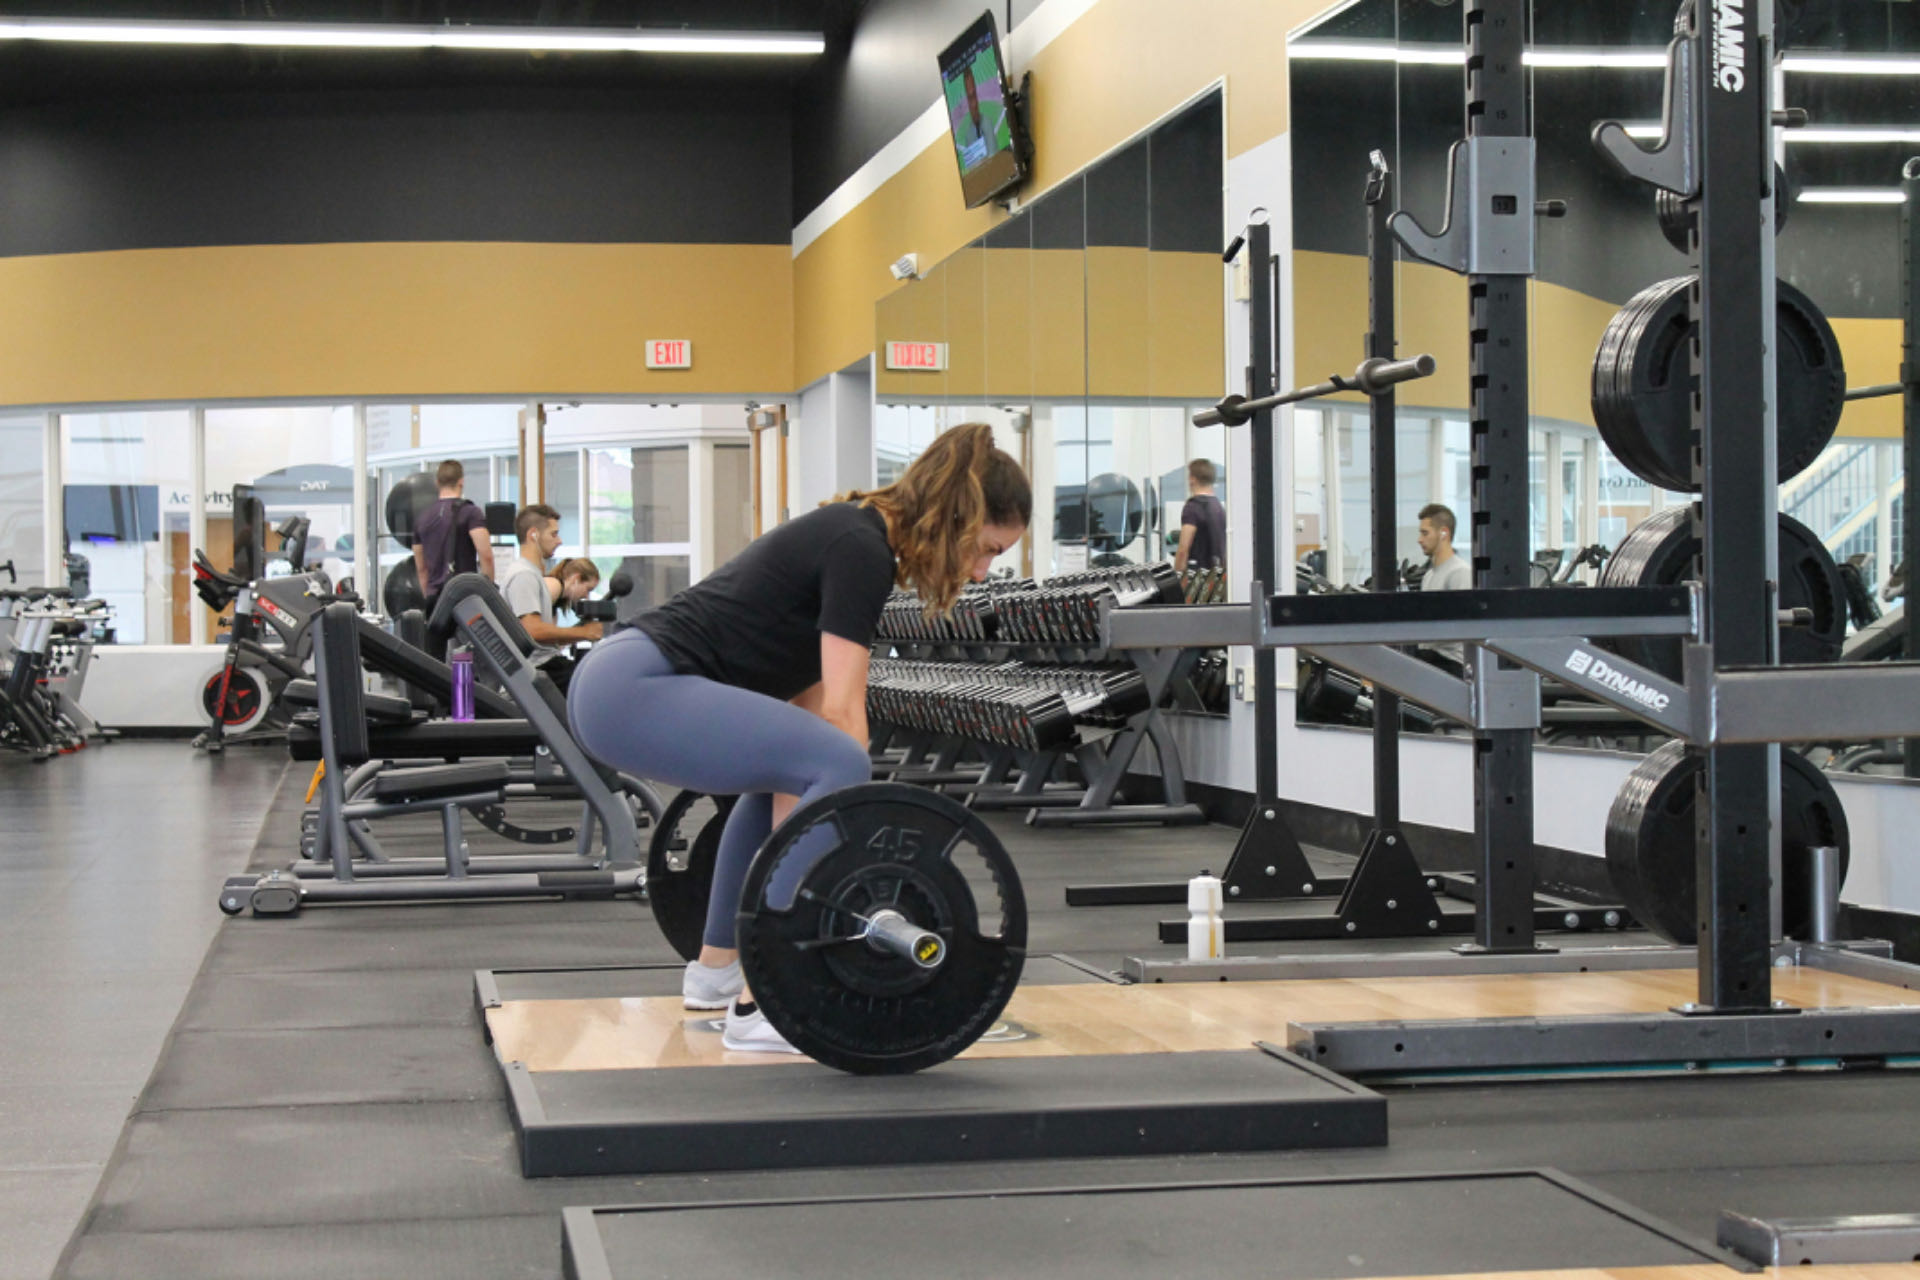 Headline: Quality is the key when buying commercial fitness equipment for functional training